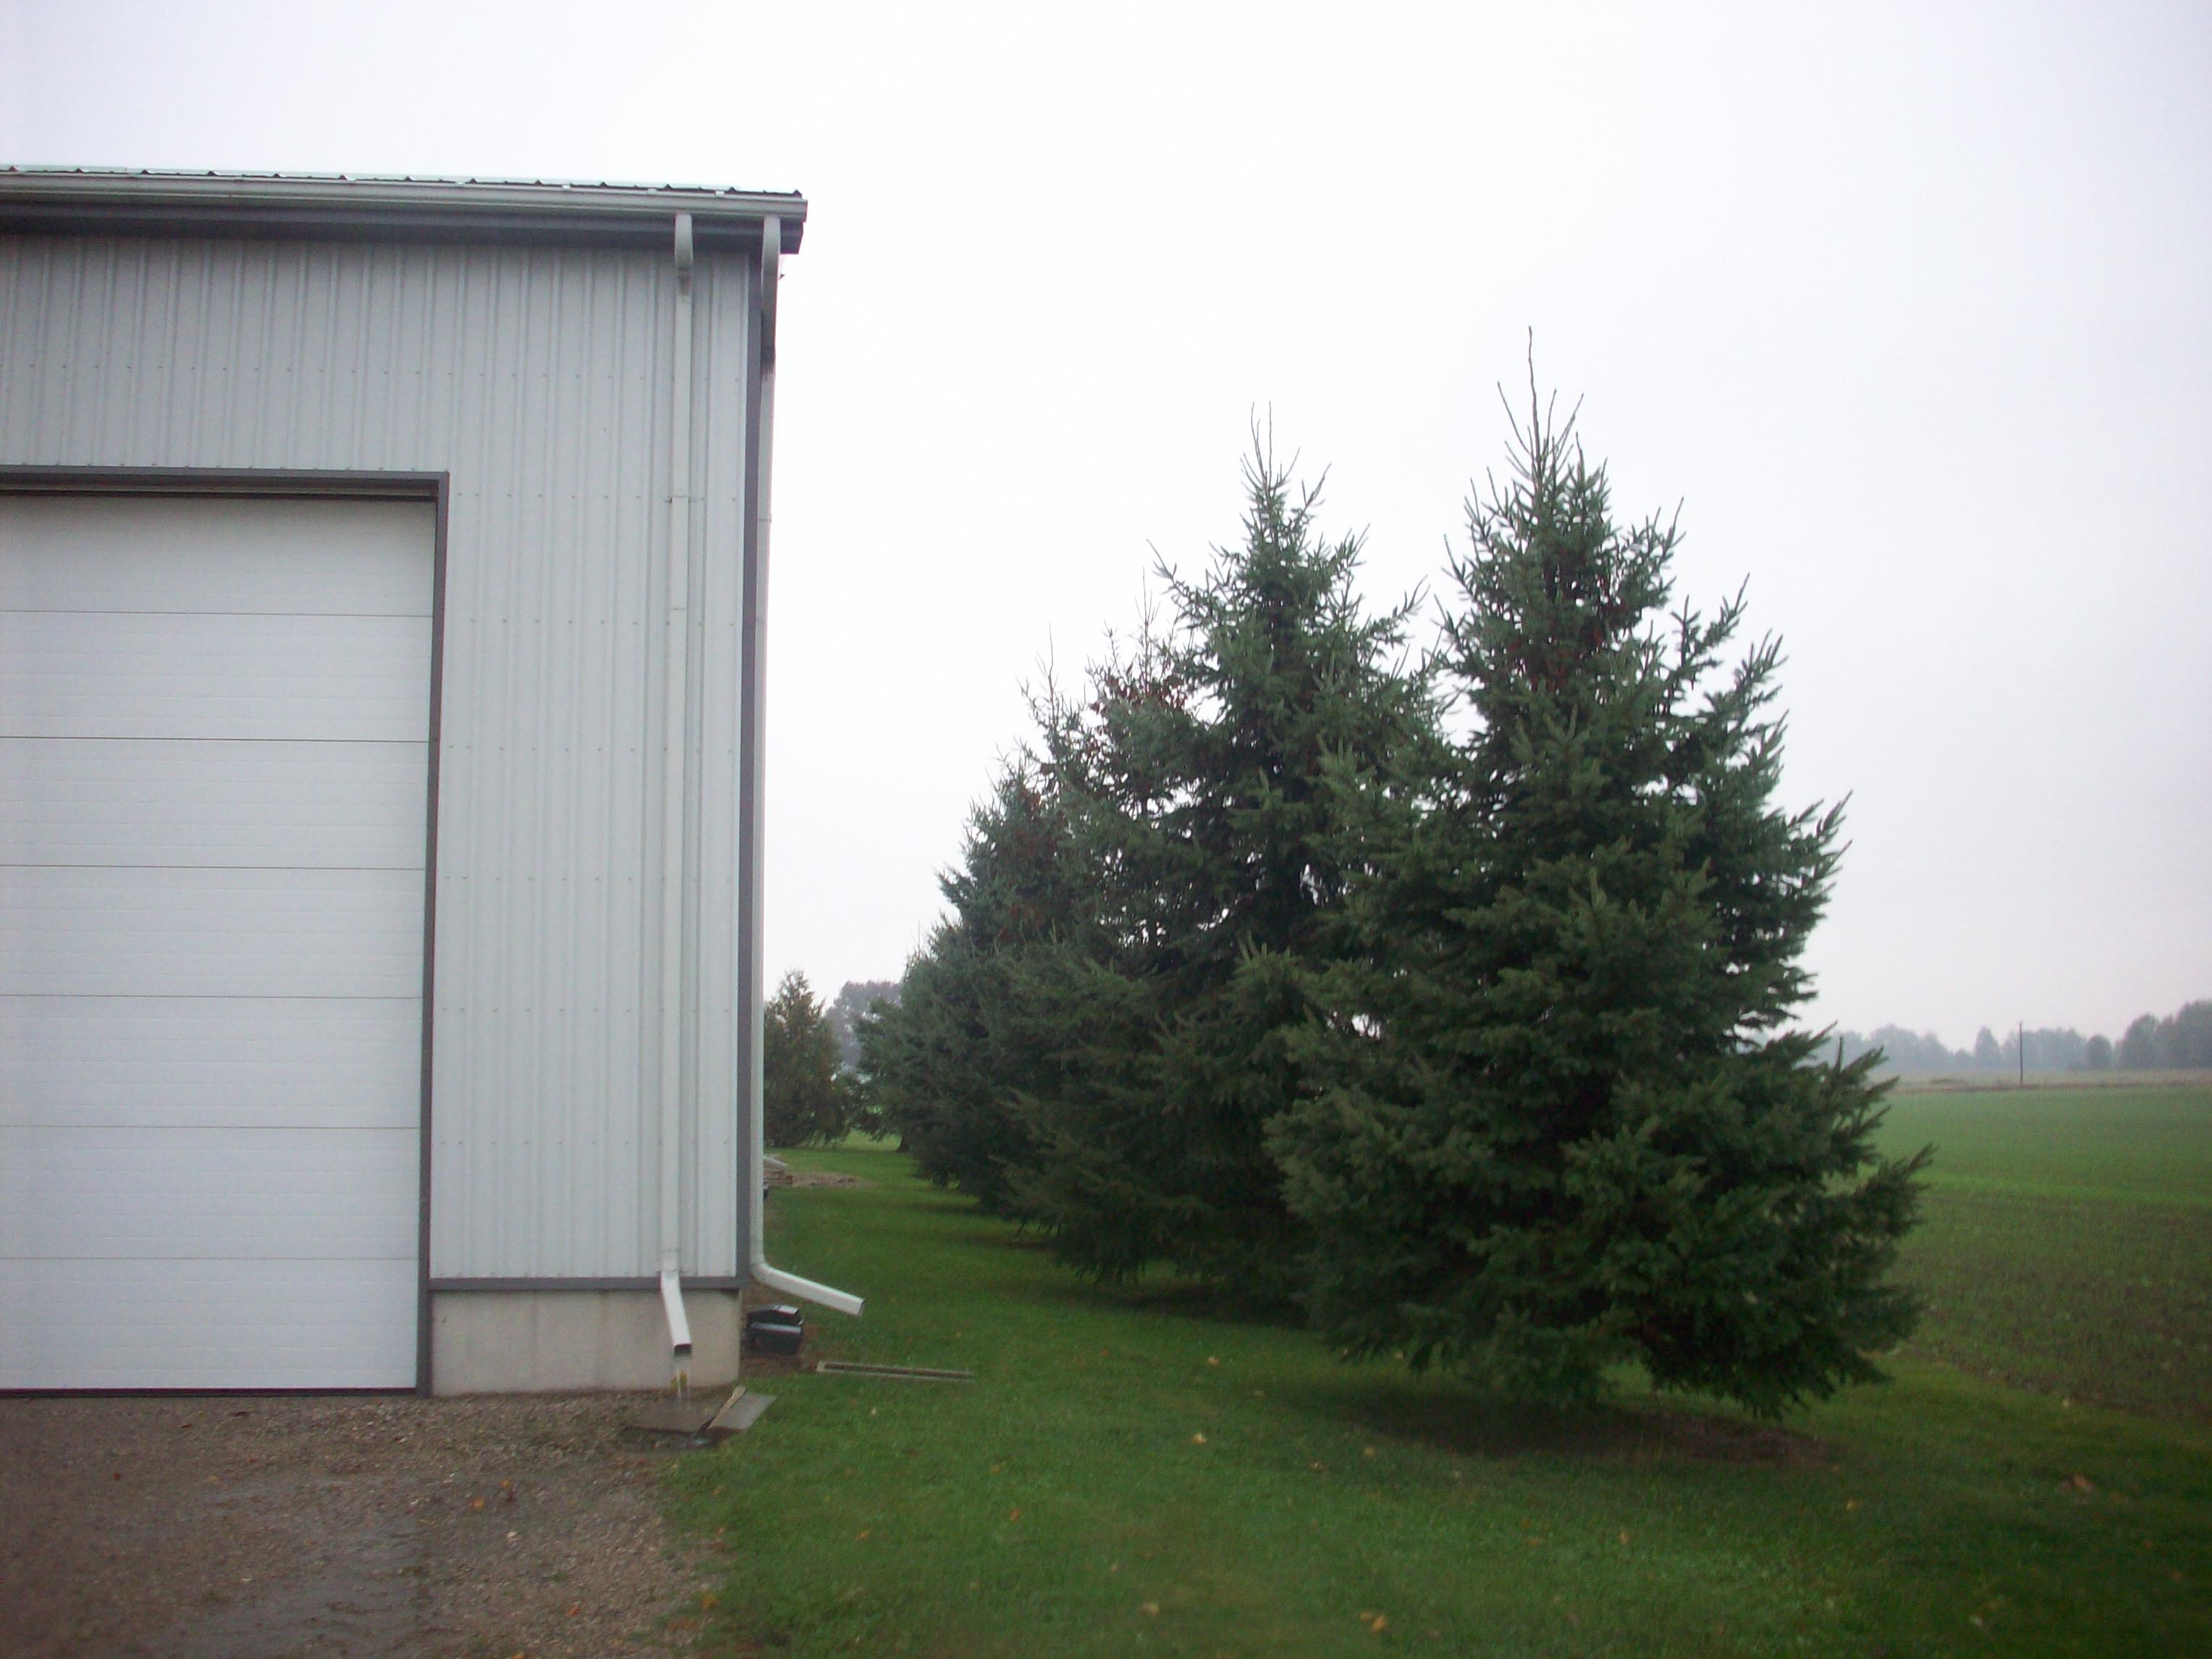 garage with fir trees planted beside the structure. The garage may not be windswept after the trees grow in height and prevent the wind from sweeping across the garage roof